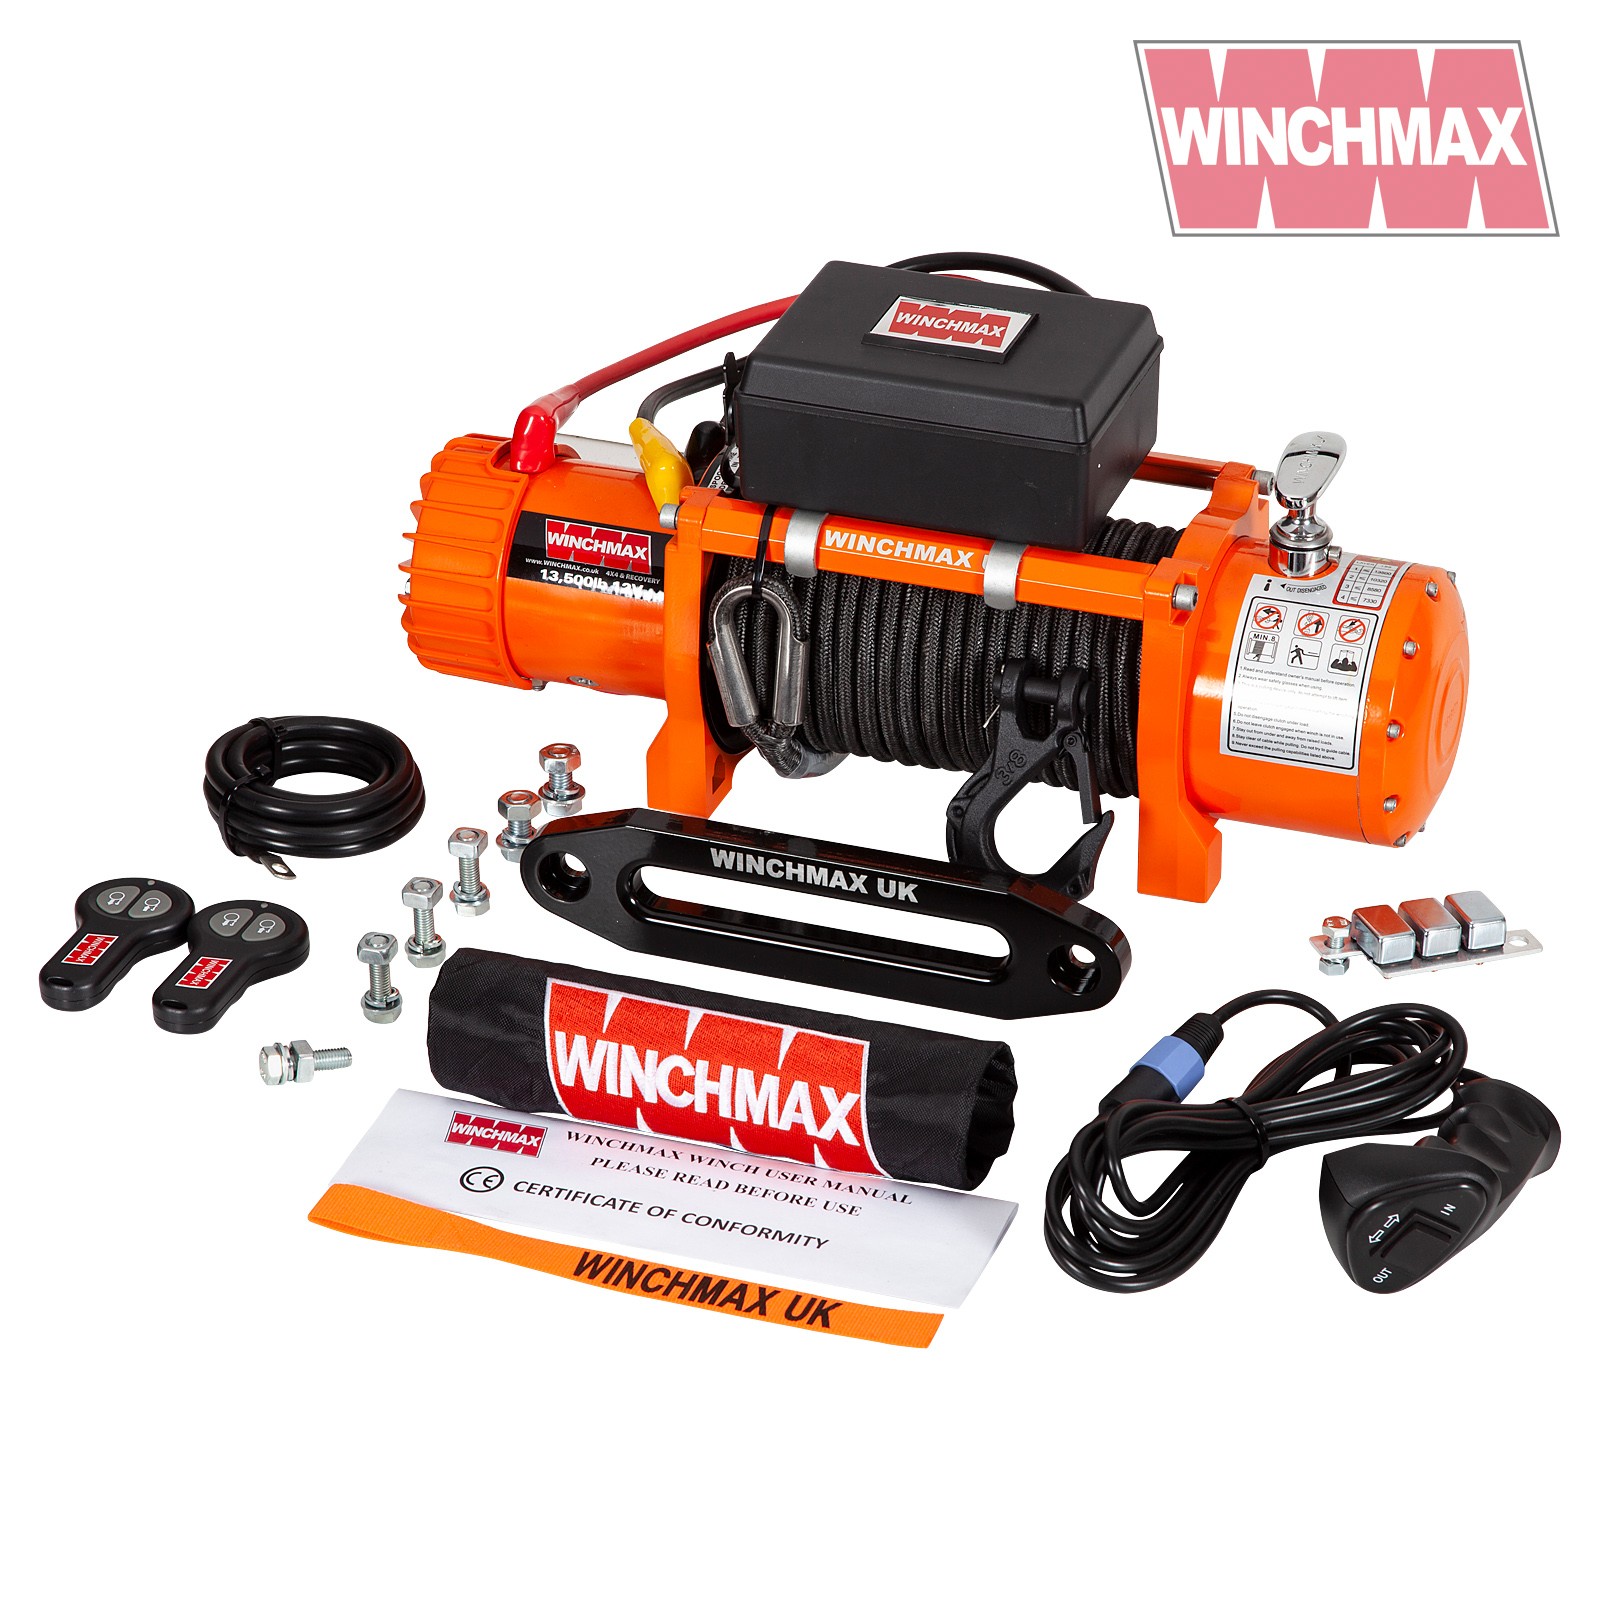 ELECTRIC WINCH 12V 4x4/RECOVERY 13500 lb WINCHMAX BRAND MOUNTING PLATE INC.